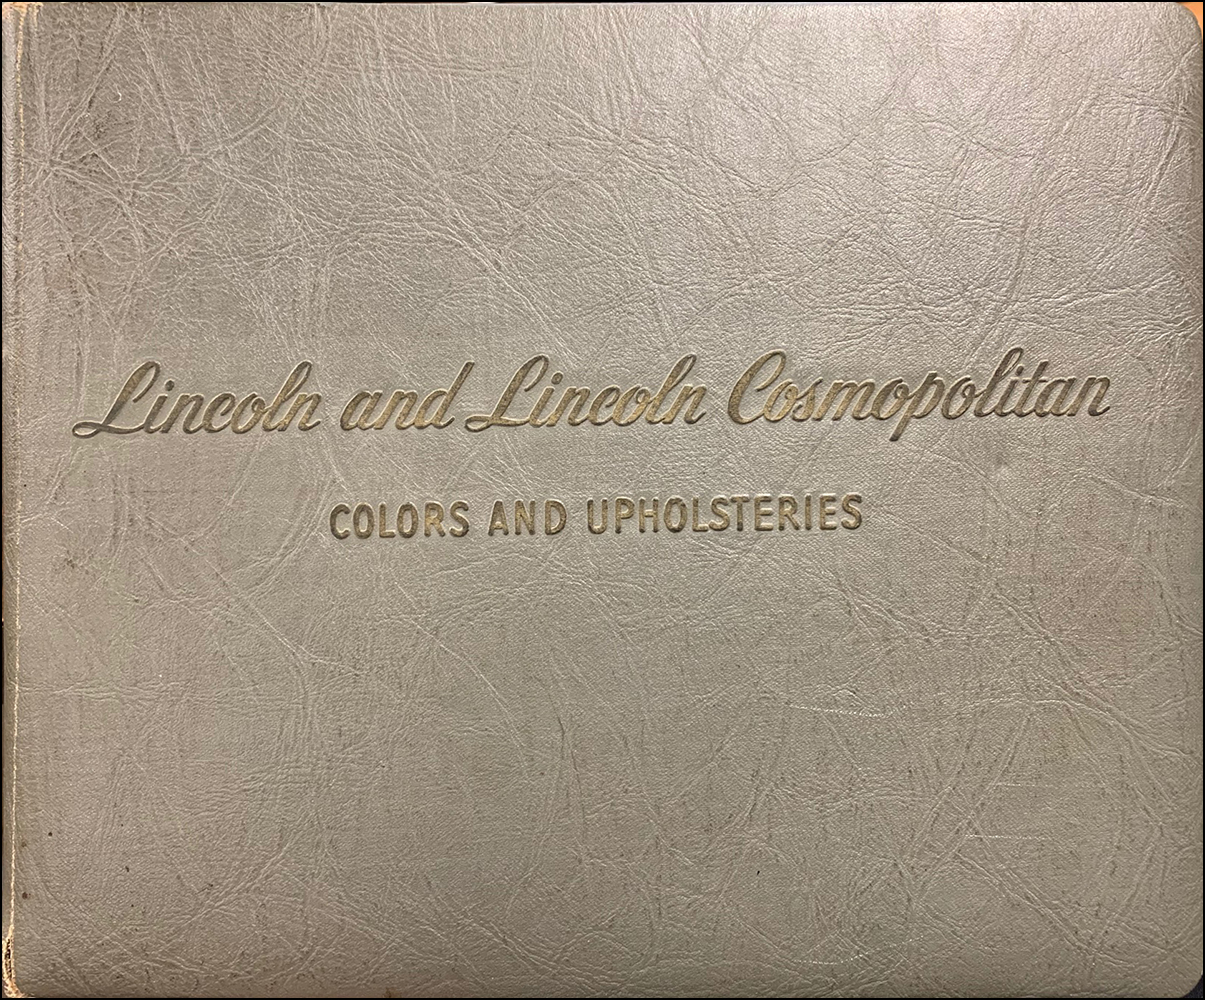 1950 Lincoln Color and Upholstery Dealer Album